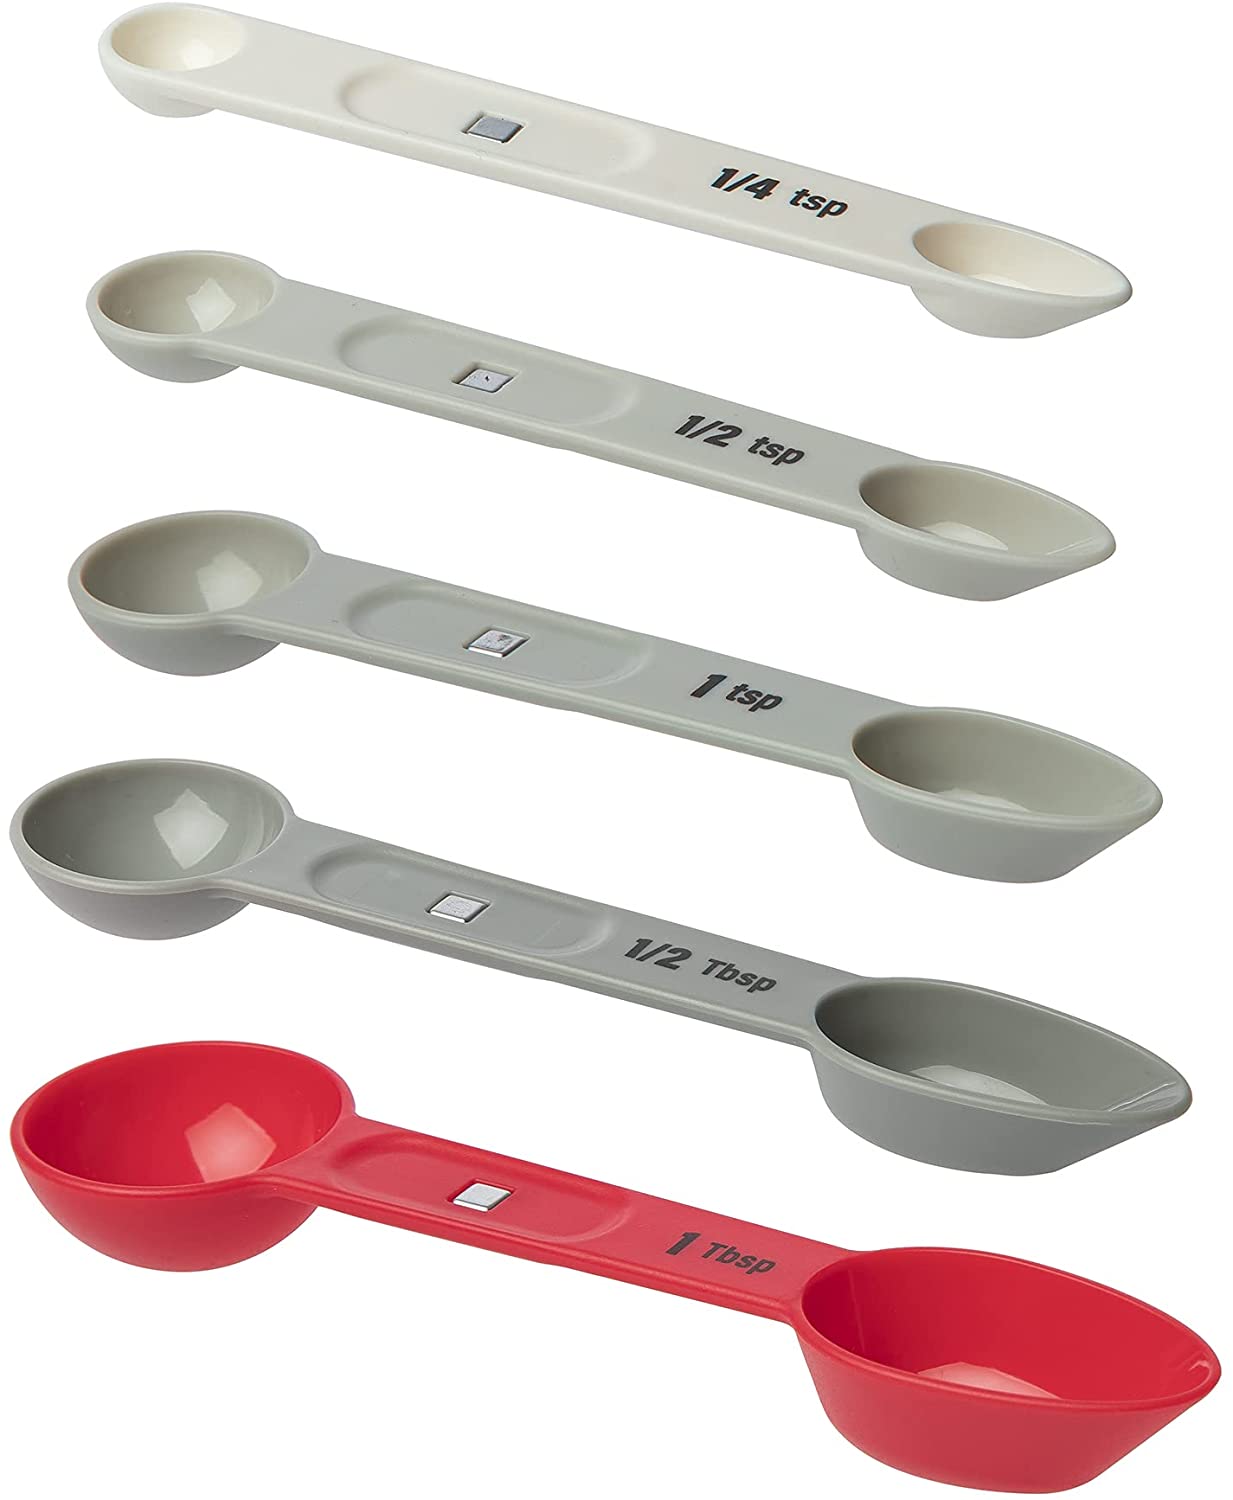 Magnetic Measuring Spoons - The Peppermill